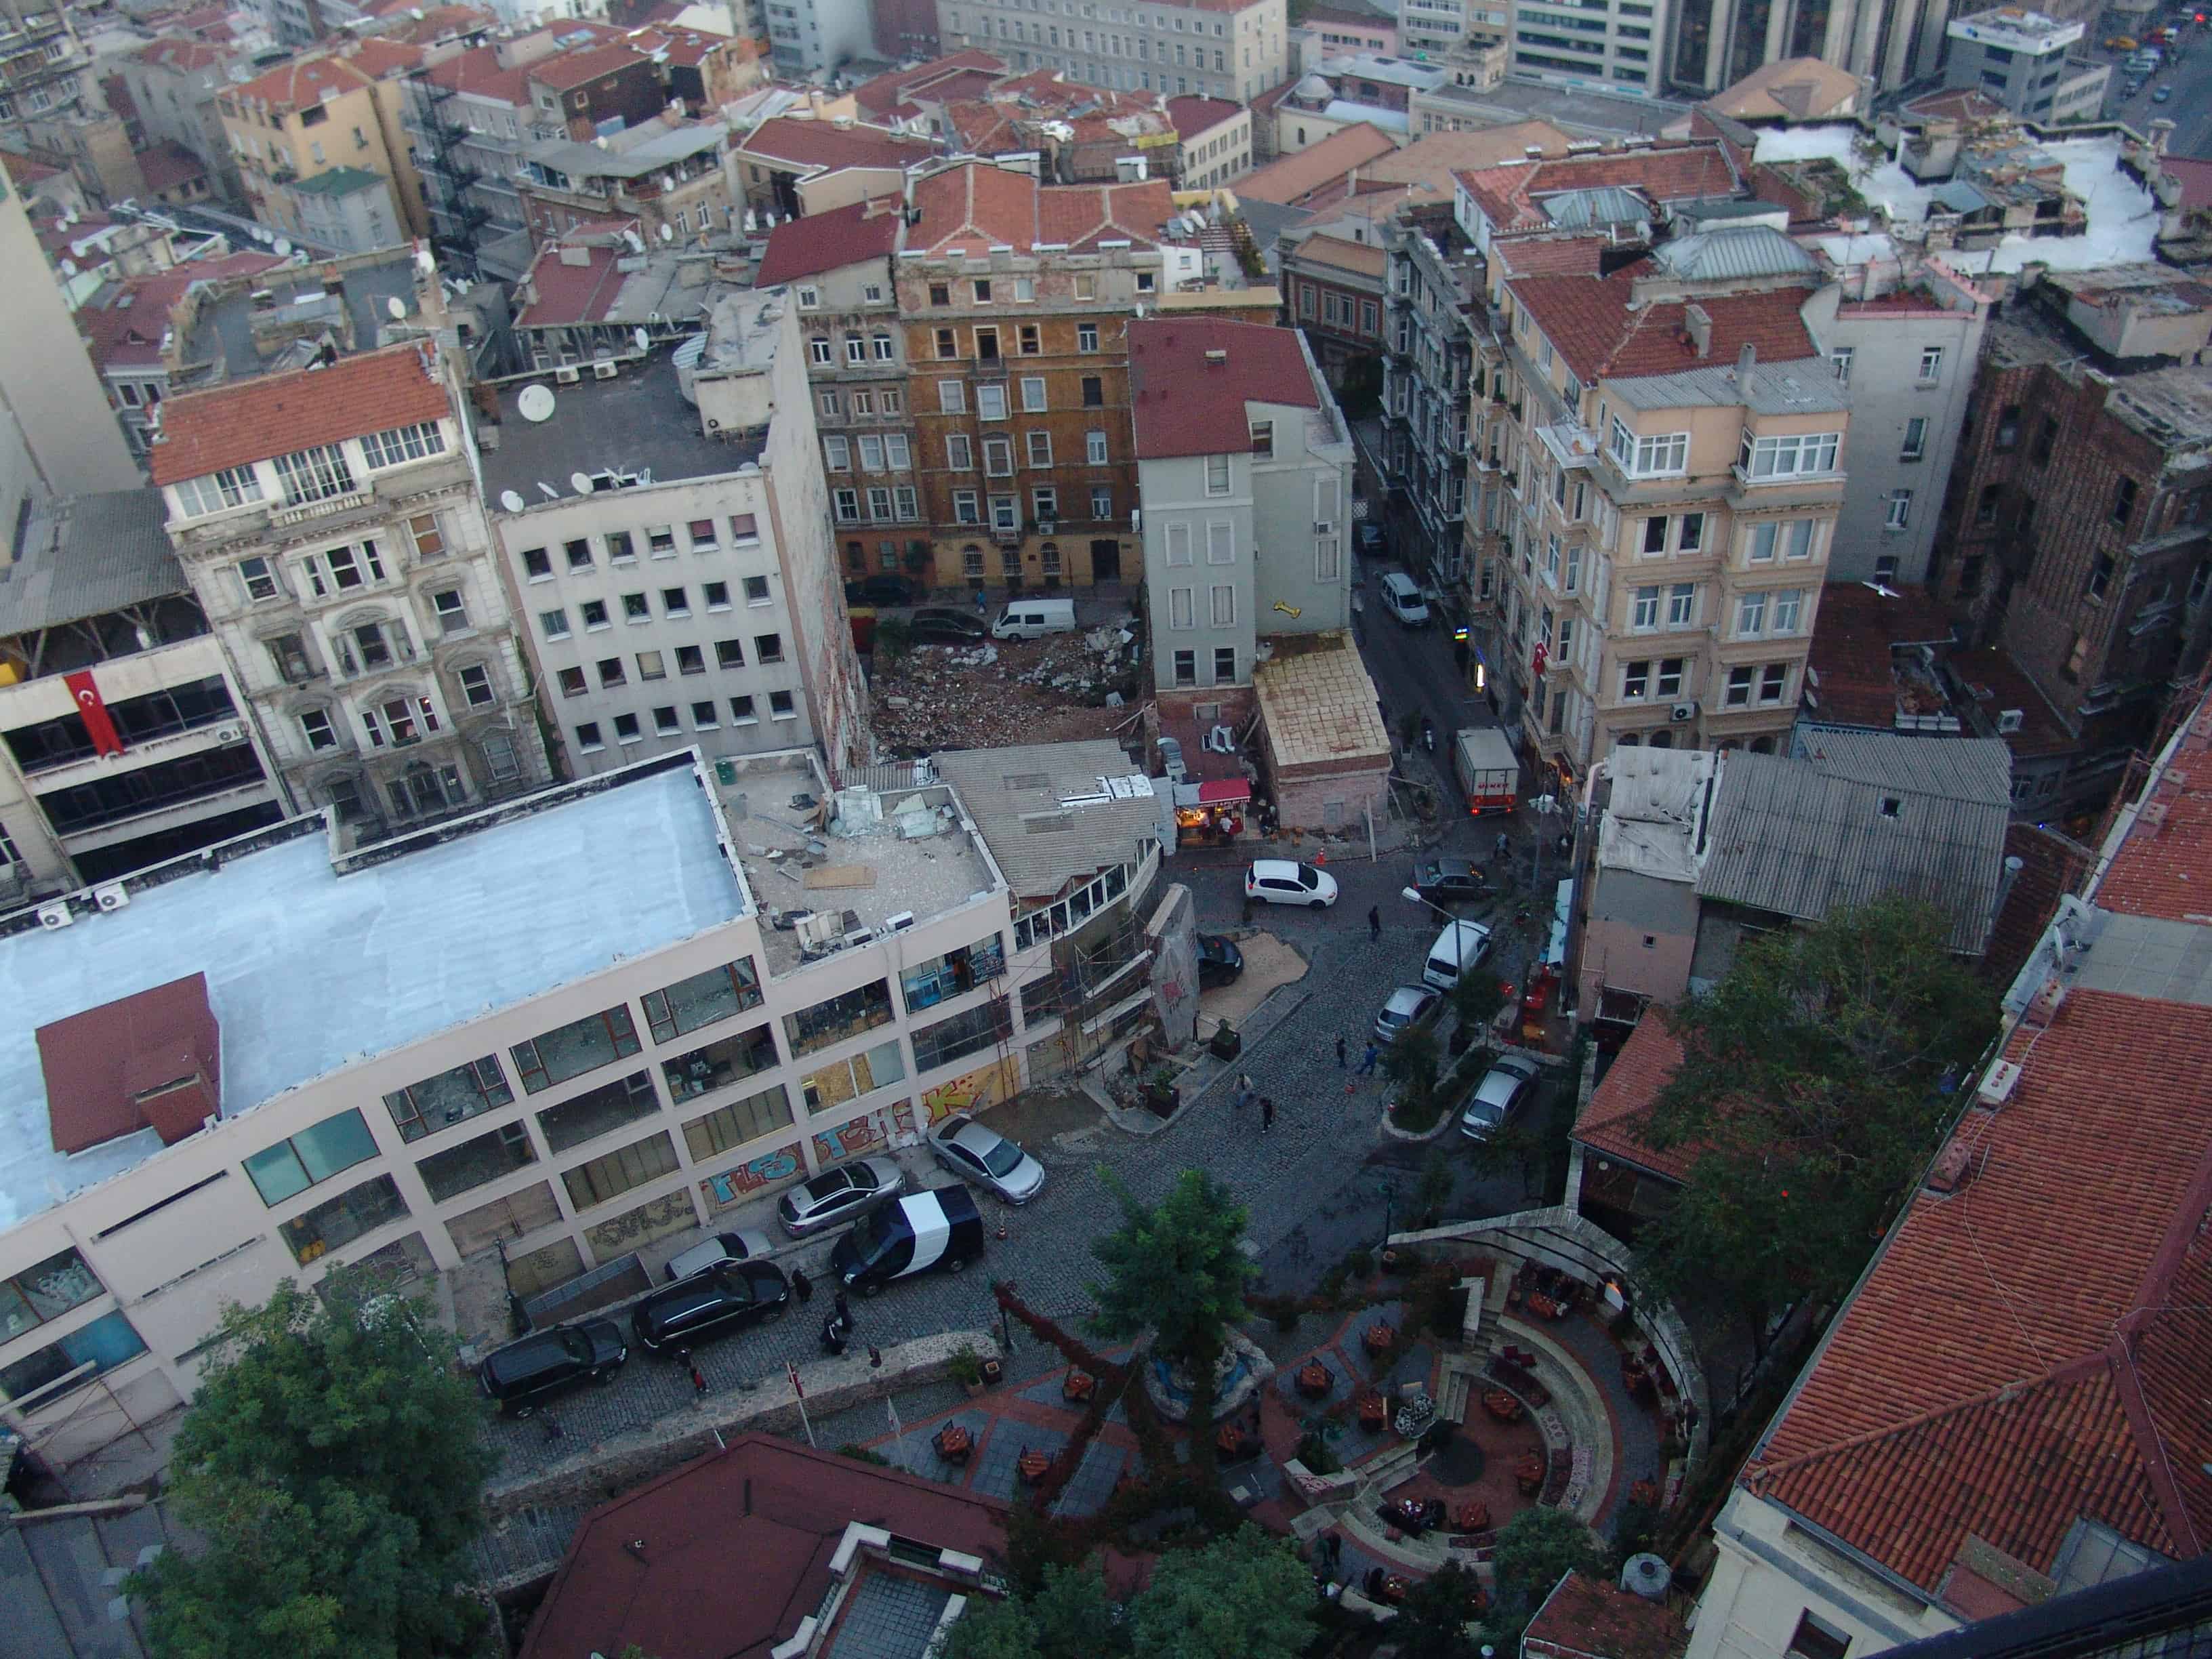 Looking down from the top of the Galata Tower in Beyoğlu, Istanbul, Turkey